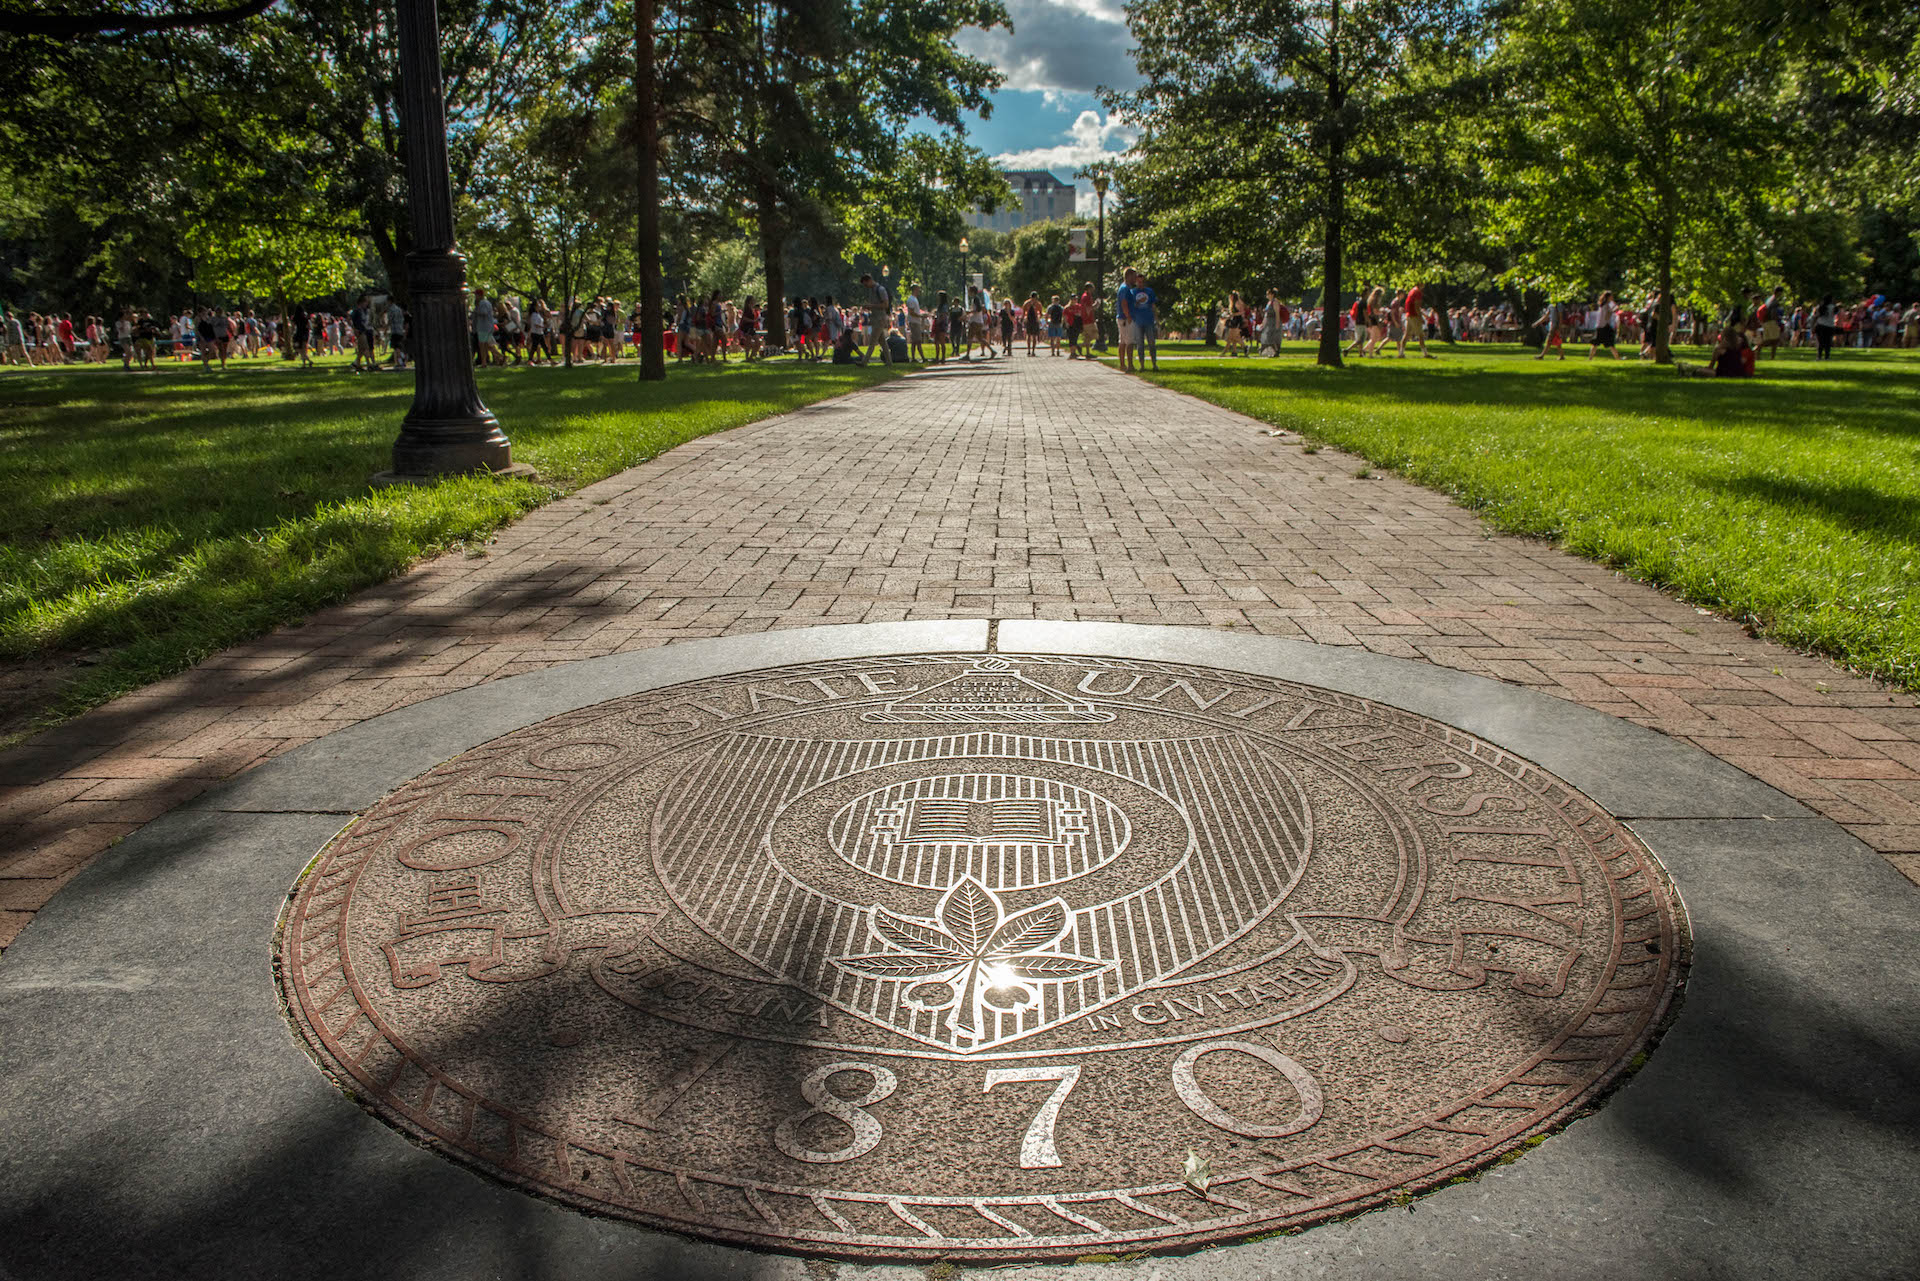 Picture of the seal of The Ohio State University on a brick walkway in the Oval.